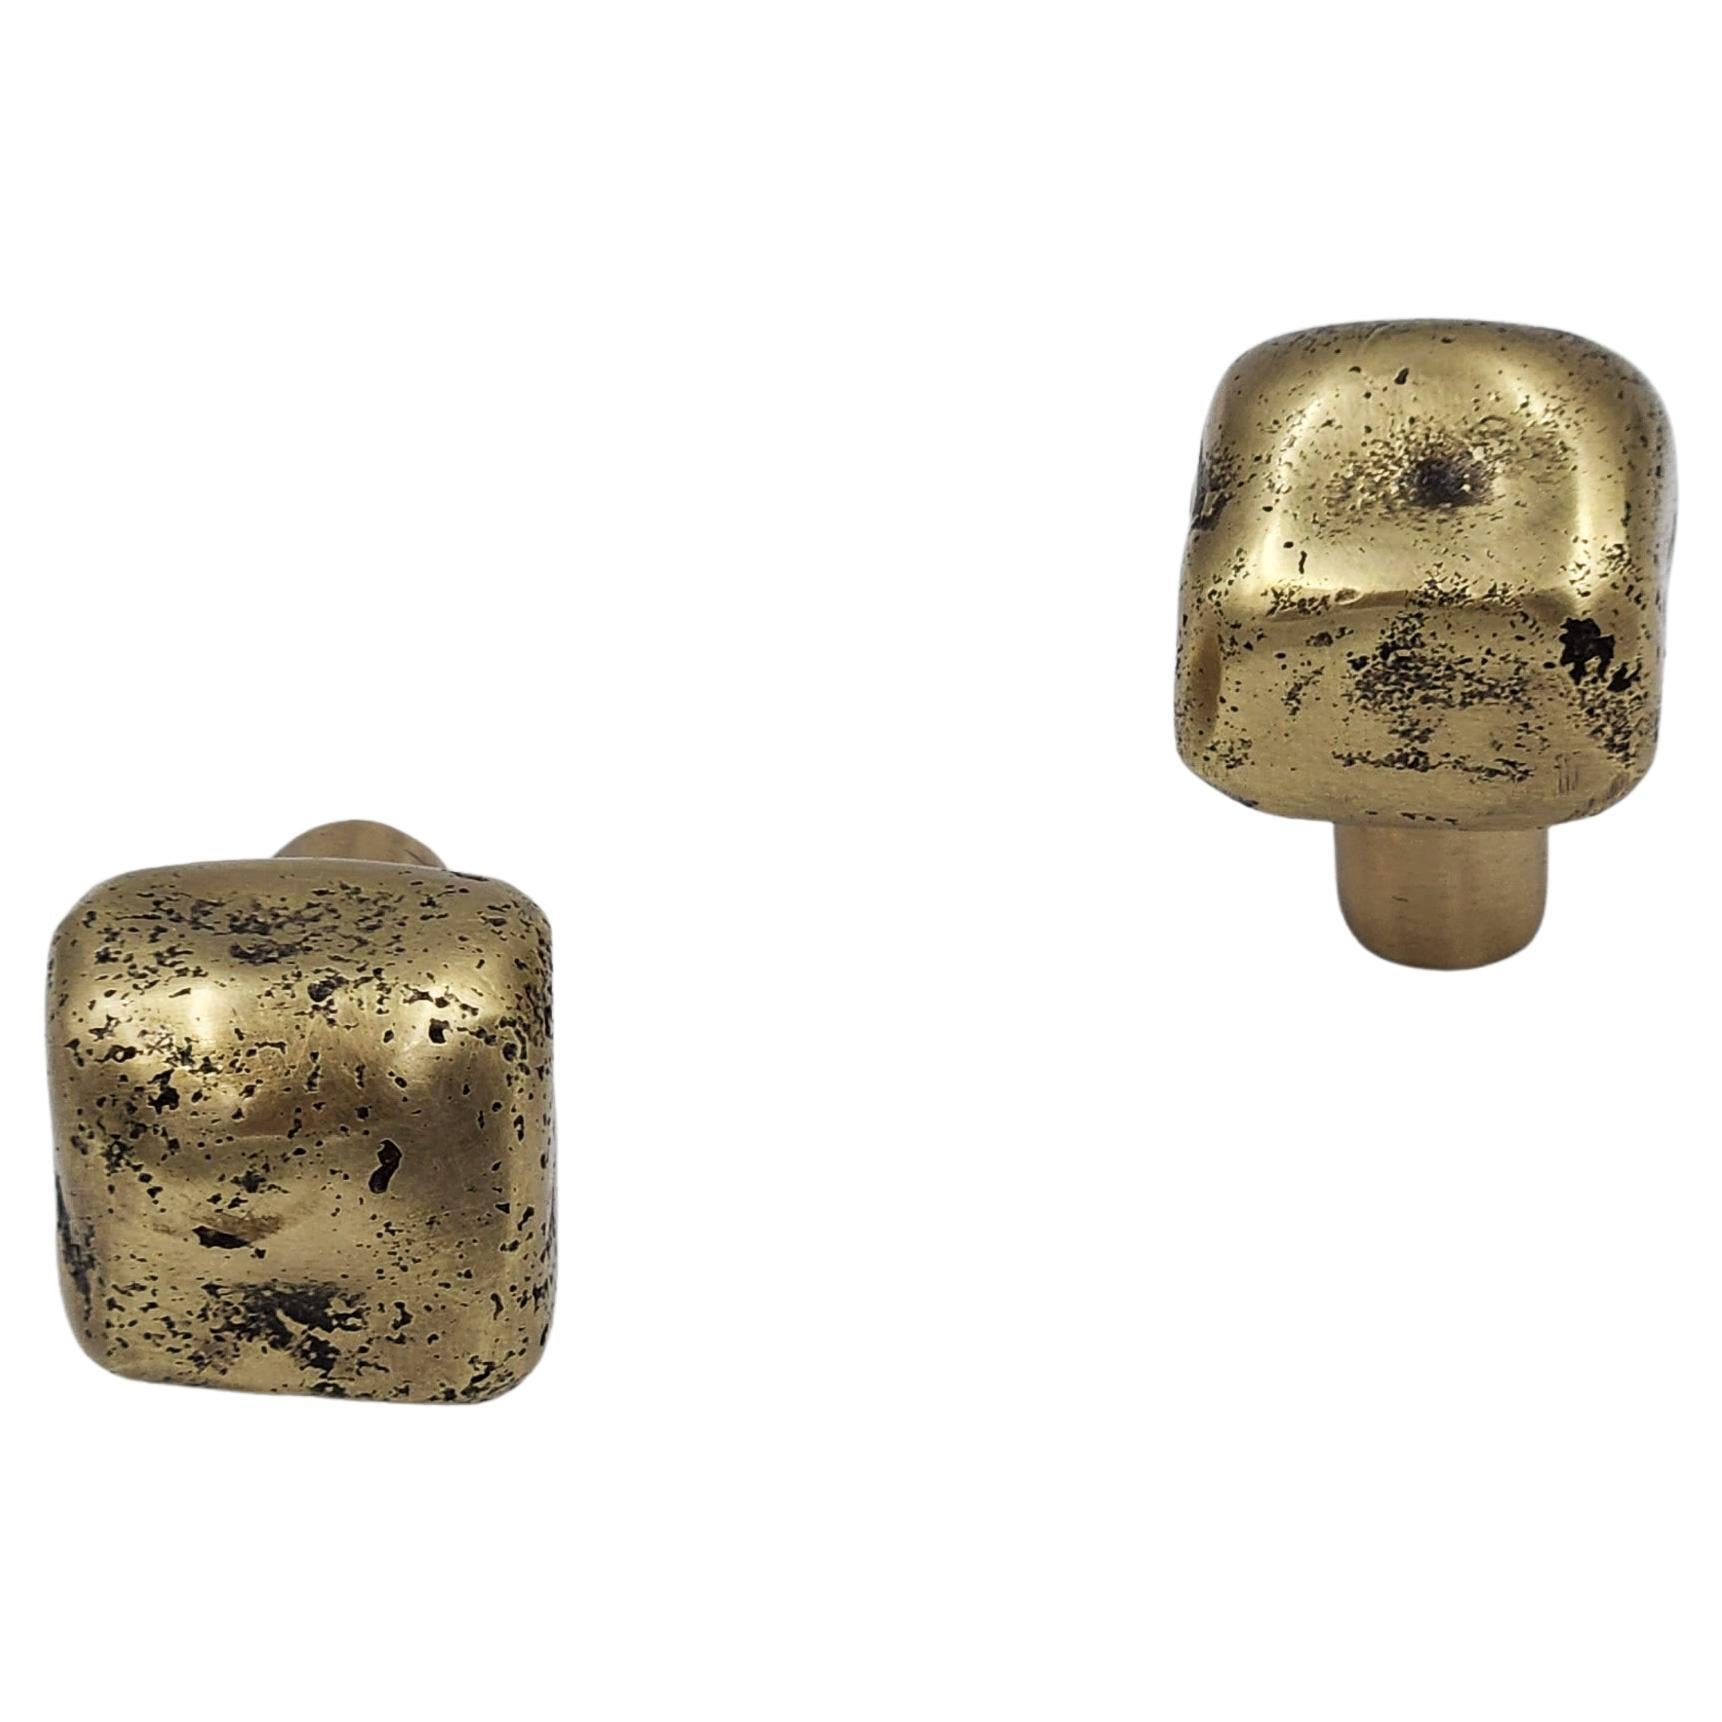 Solid Brass Door Knobs Mineral Inspiration 2.5 x 2.5 cm For Sale